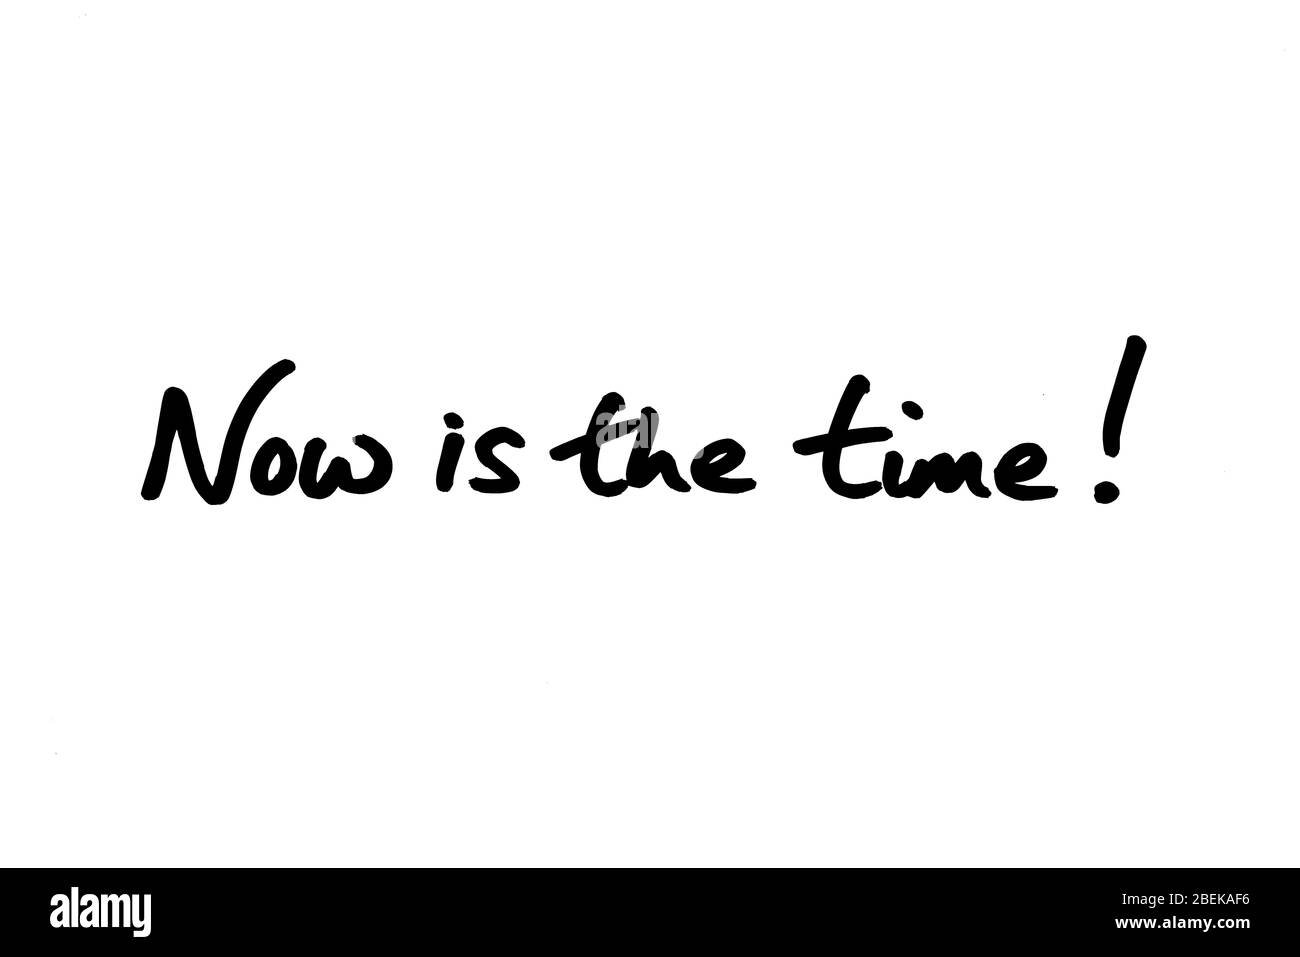 Now is the time! handwritten on a white background. Stock Photo